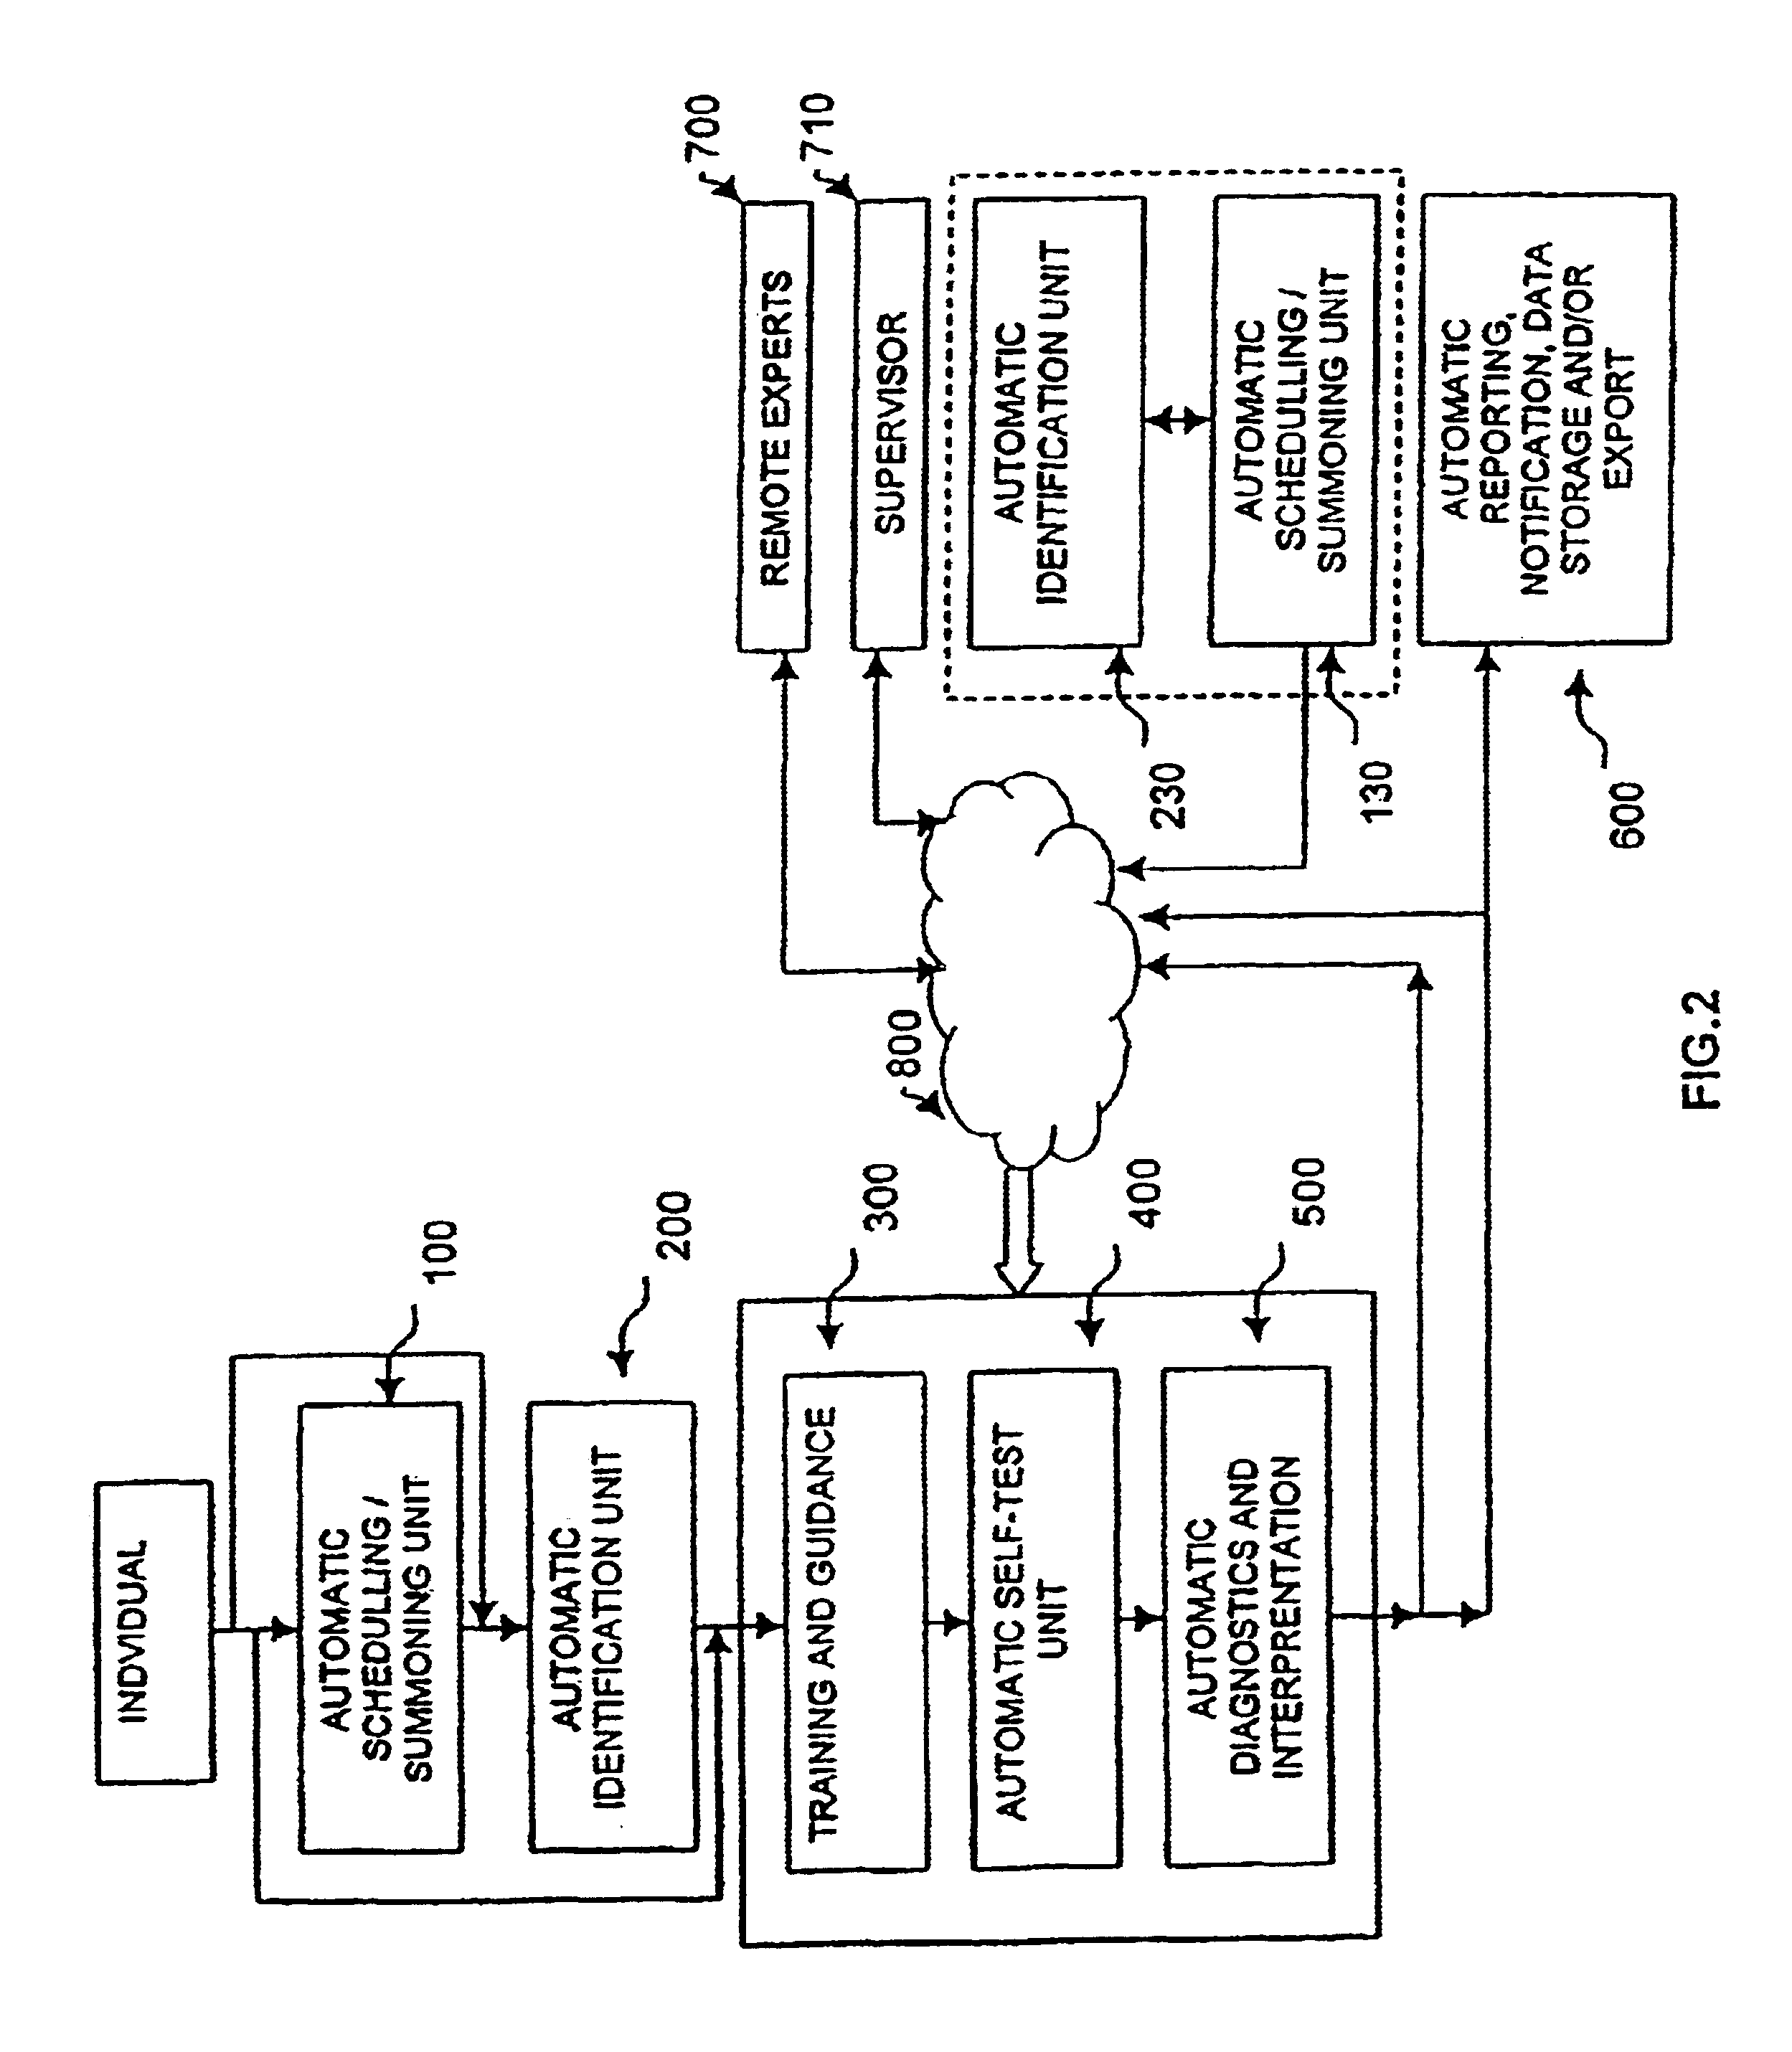 System and method for automated self measurement of alertness equilibrium and coordination and for ventification of the identify of the person performing tasks